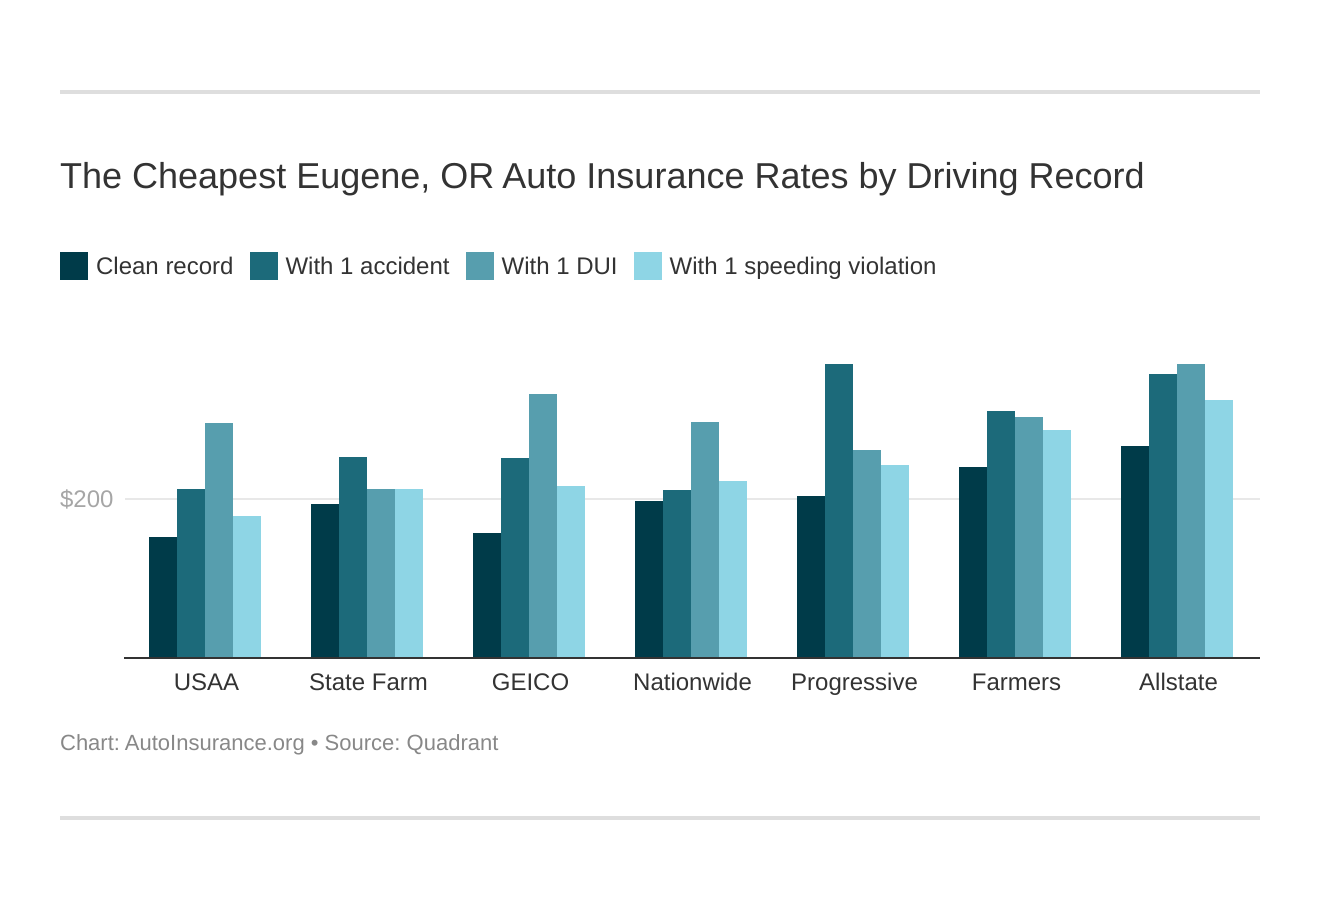 The Cheapest Eugene, OR Auto Insurance Rates by Driving Record